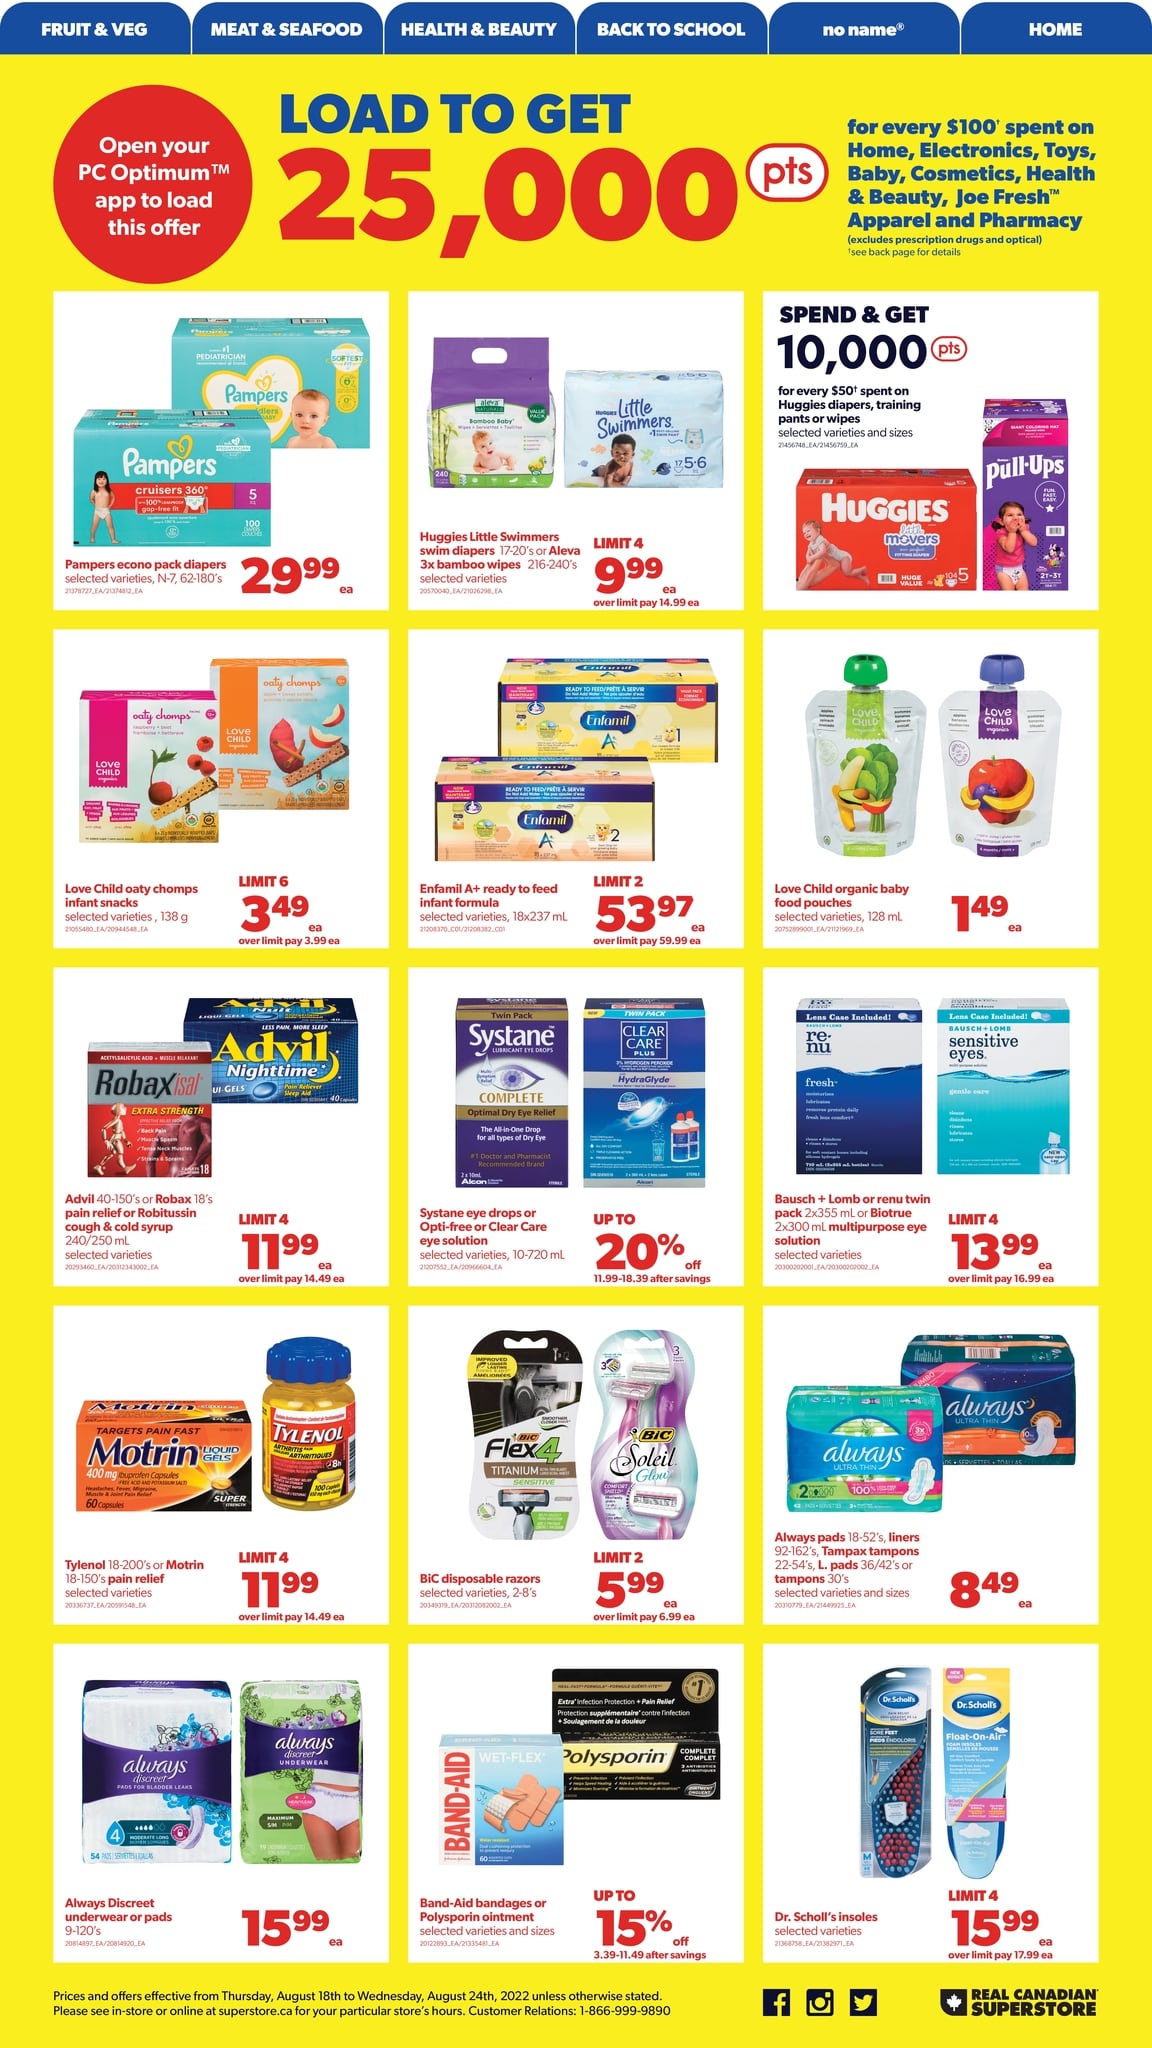 Real Canadian Superstore Western Canada - Weekly Flyer Specials - Page 23